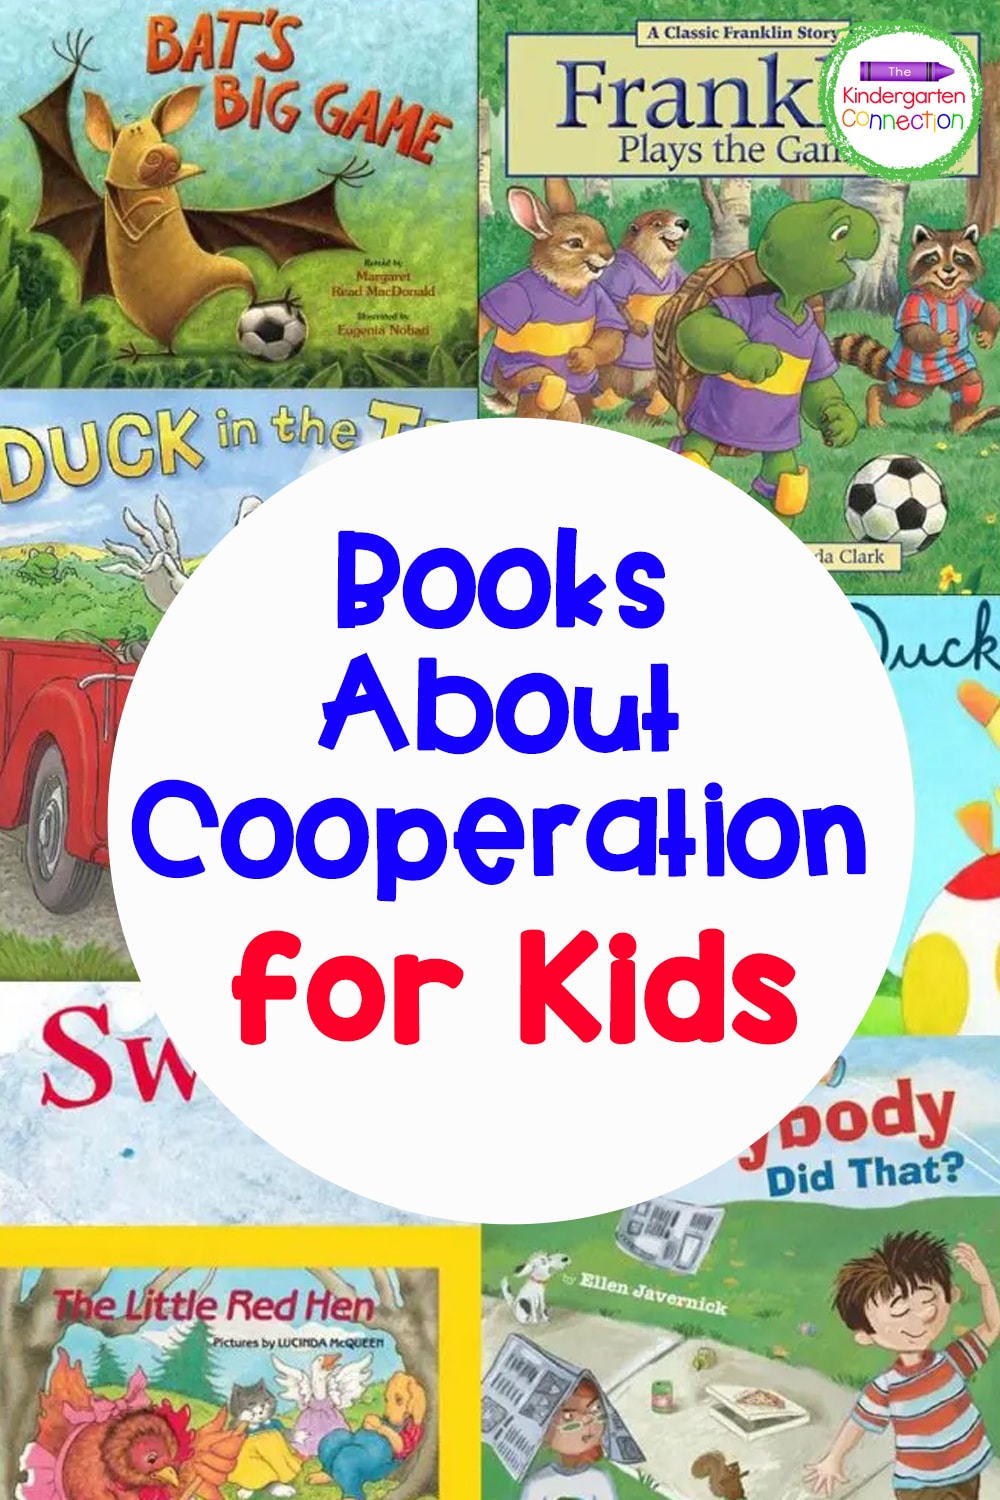 These books about cooperation are a super fun way to teach important social skills in the classroom! Your students are sure to love them!